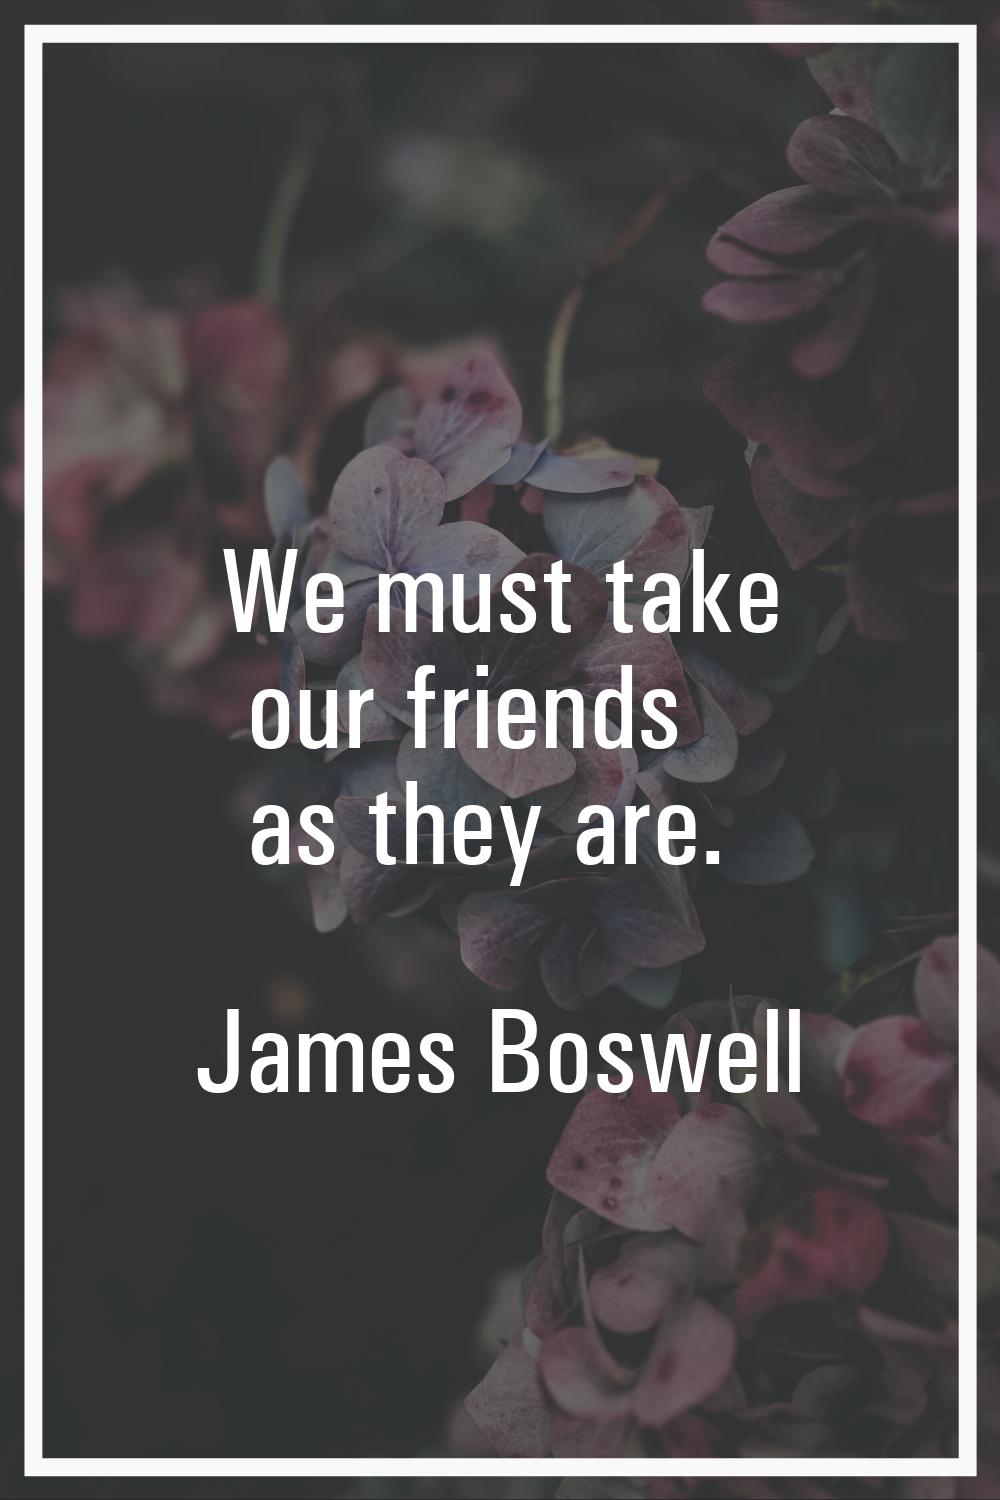 We must take our friends as they are.